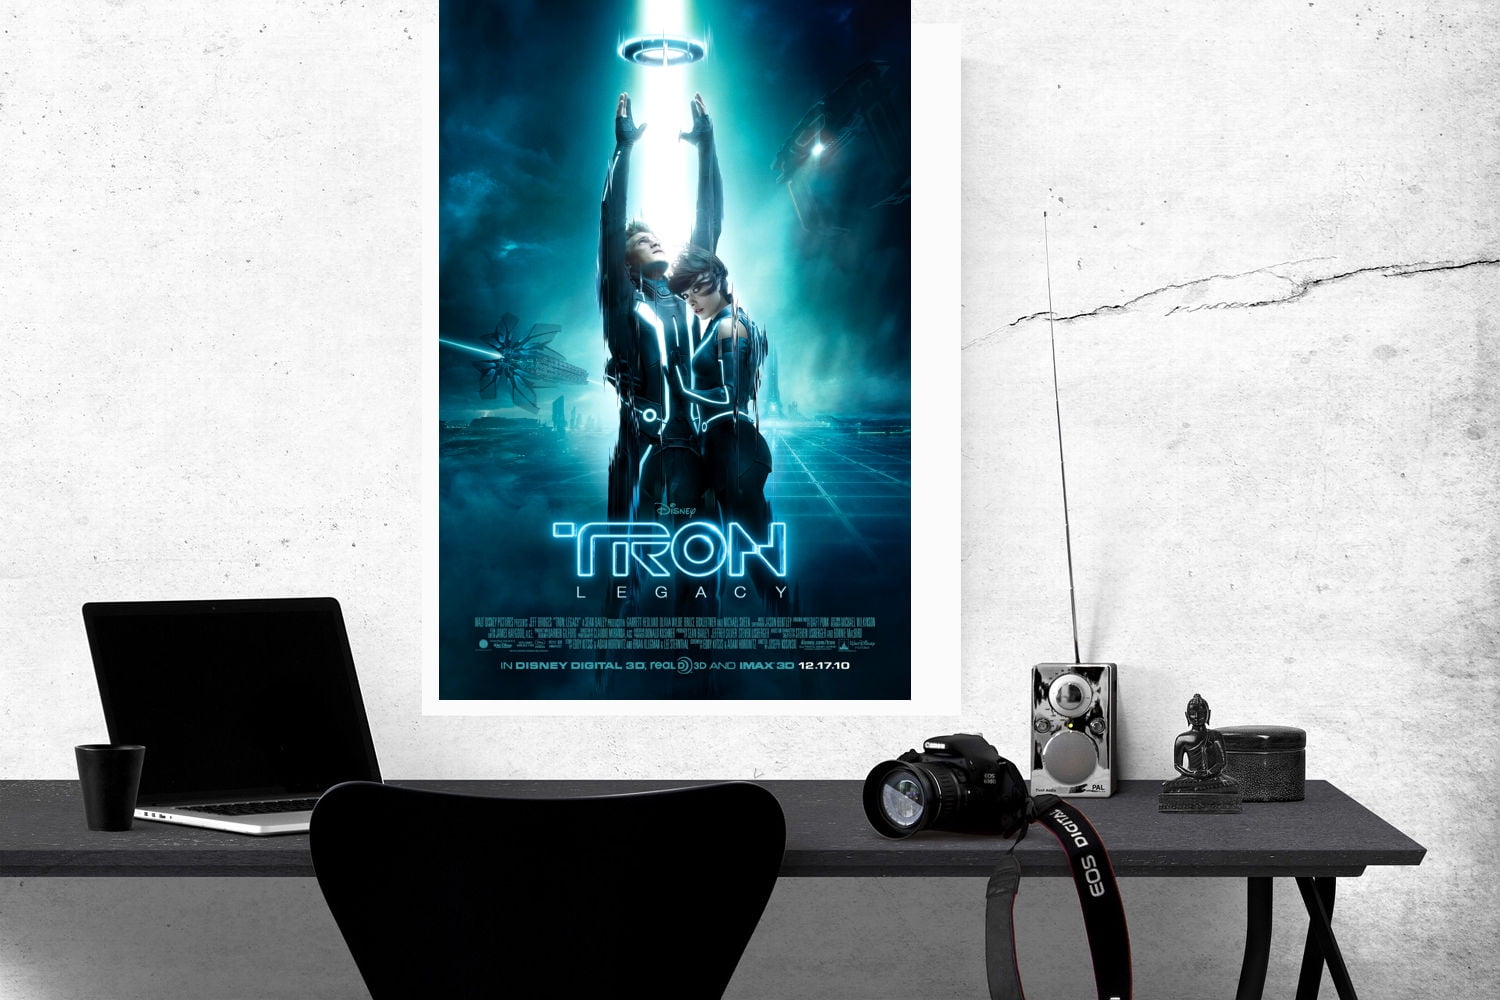 tron legacy movie Decoration Art Poster Wall Art Personalized Gift Modern  Family bedroom Decor 24x36 Canvas Posters - AliExpress